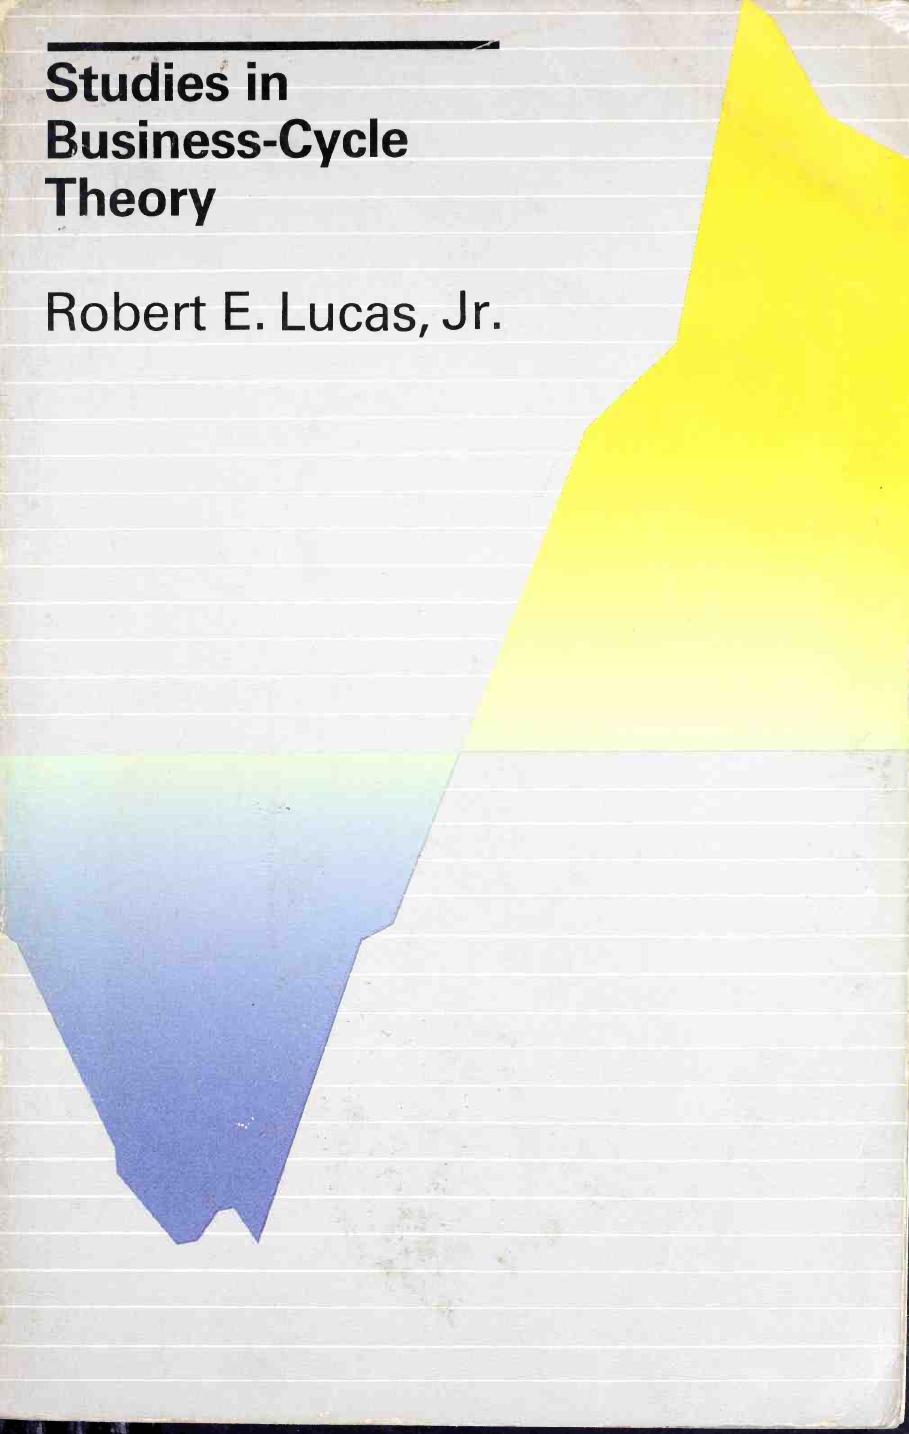 Studies in Business-Cycle Theory by Robert E. Lucas